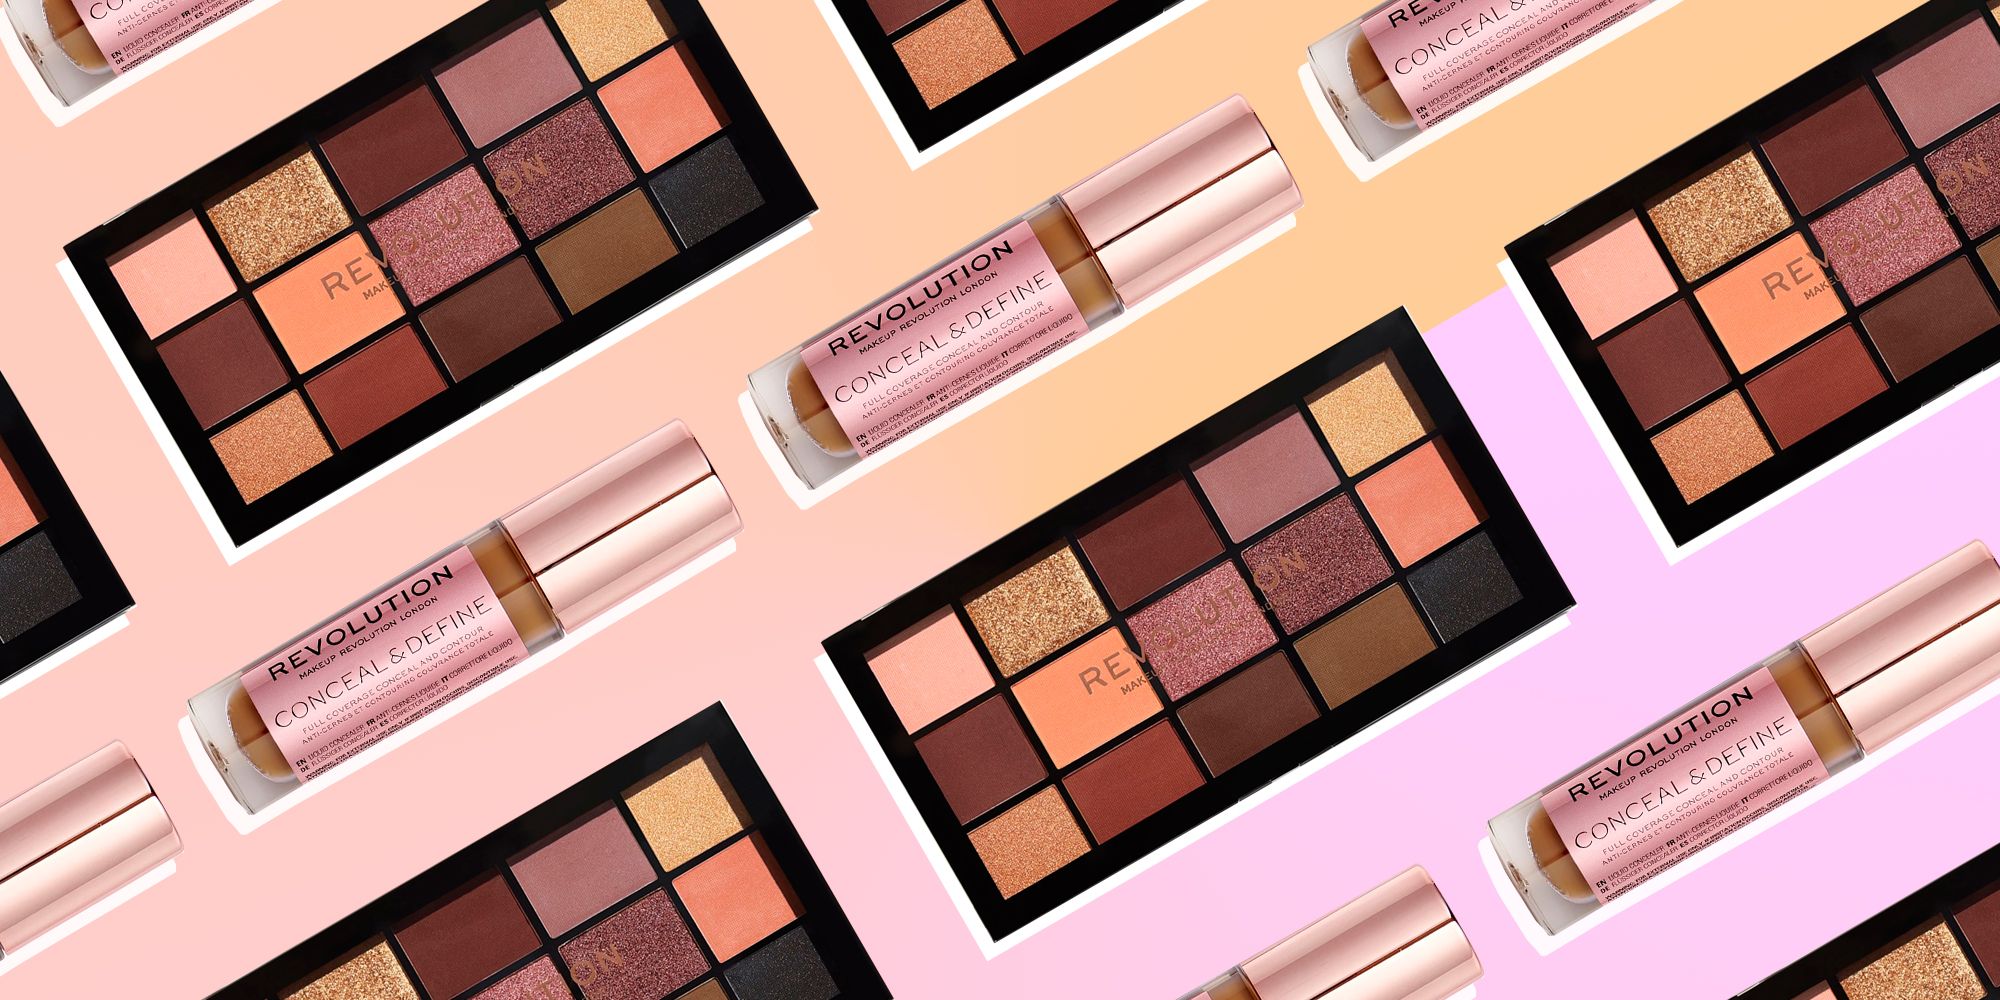 7 under products that could totally pass for high